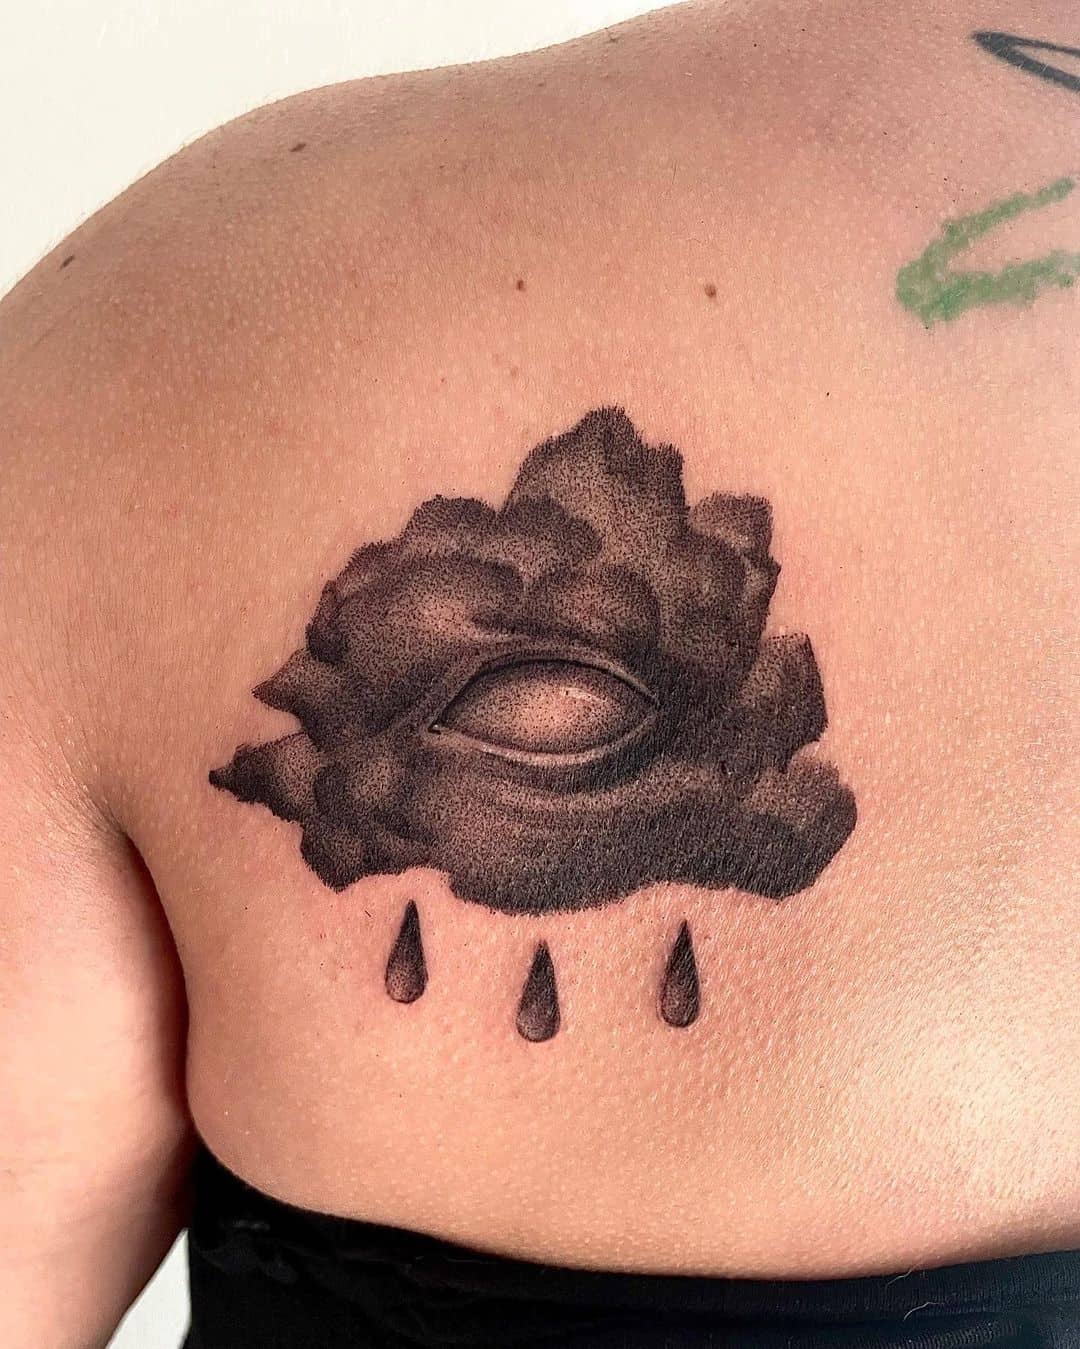 Thunder cloud tattoo by vaikes ink